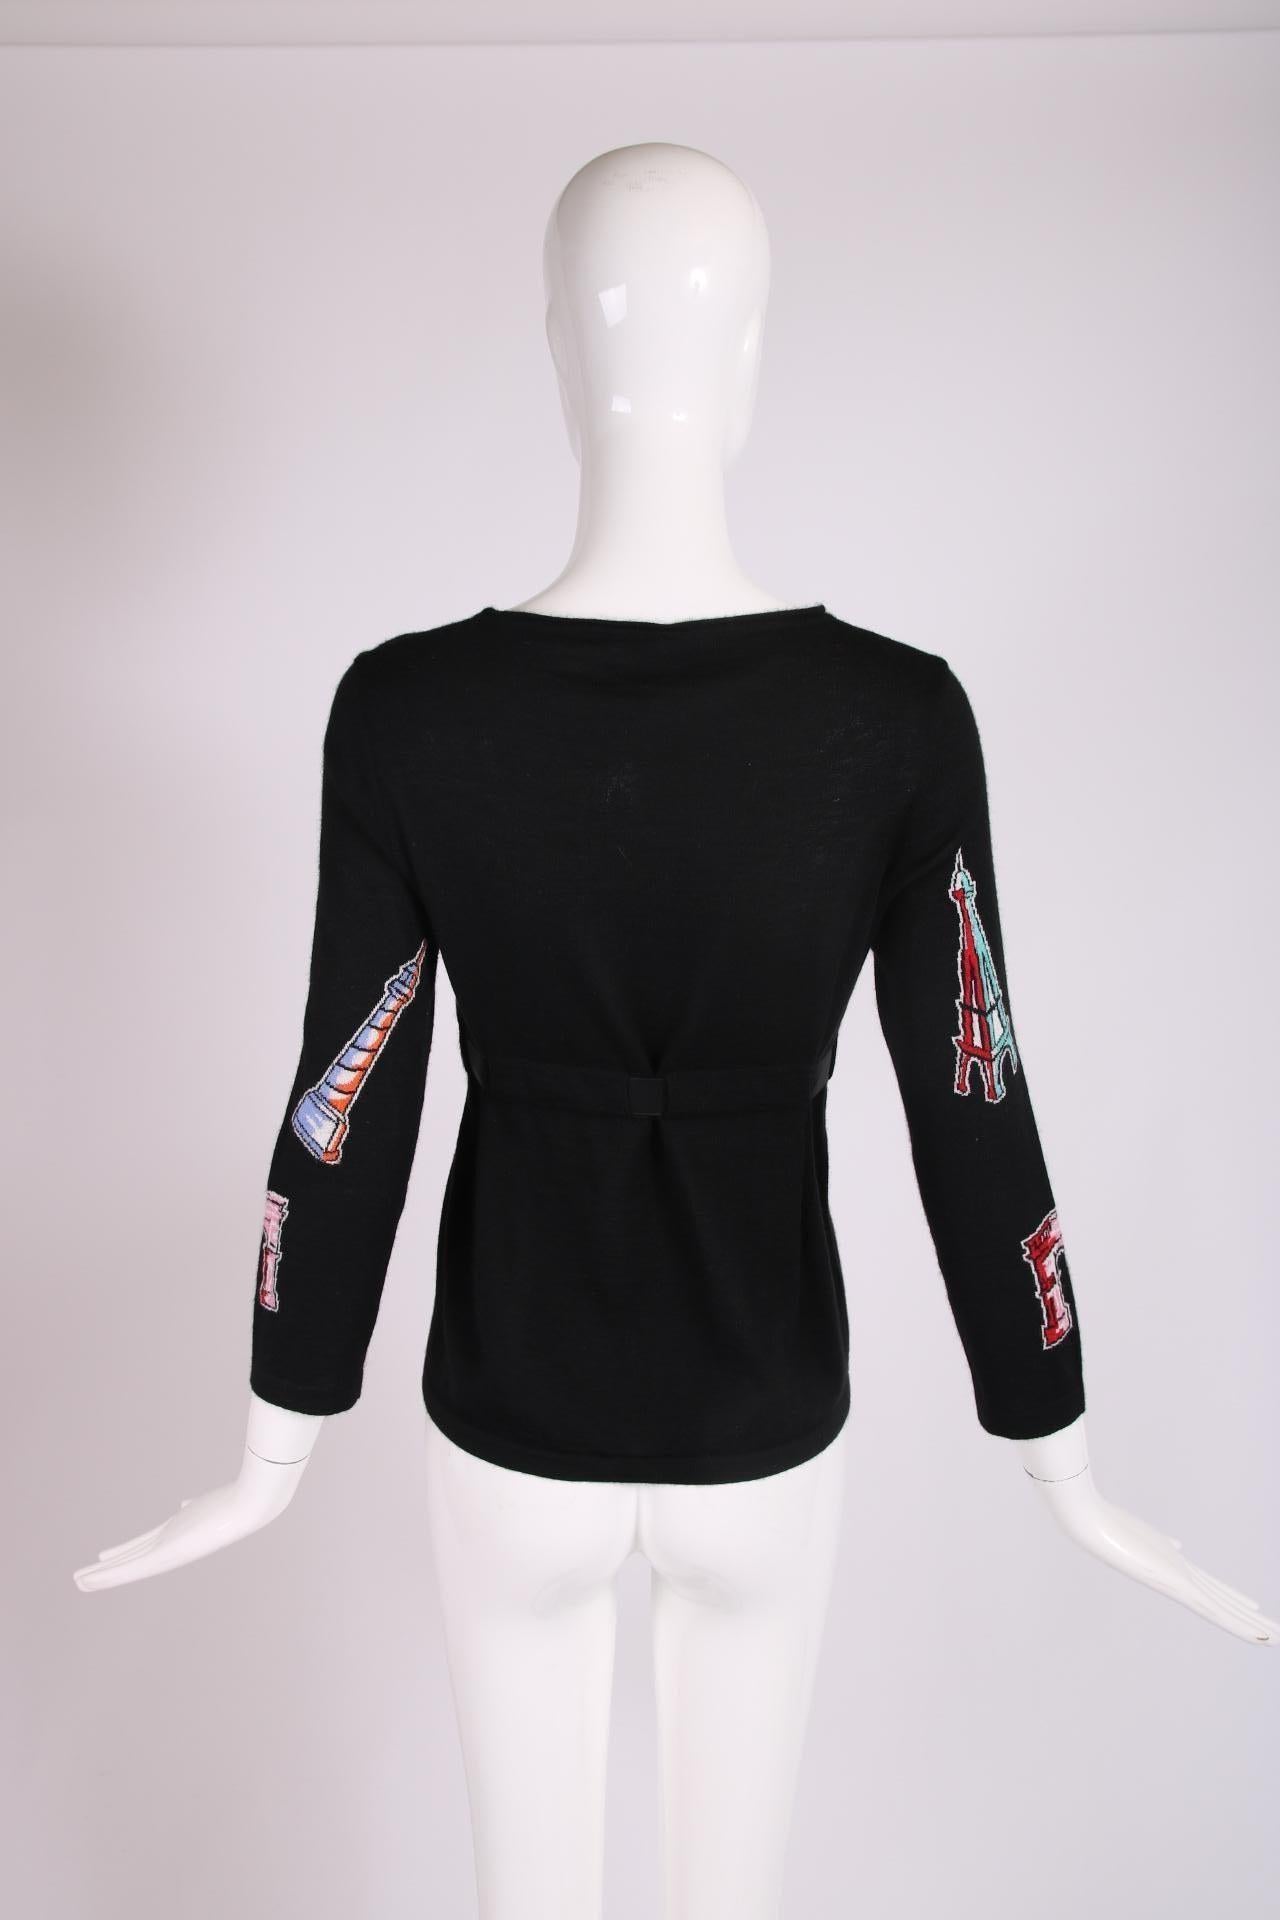 Chanel Black Cashmere Novelty Sweater w/Ribbon at Waist For Sale 1